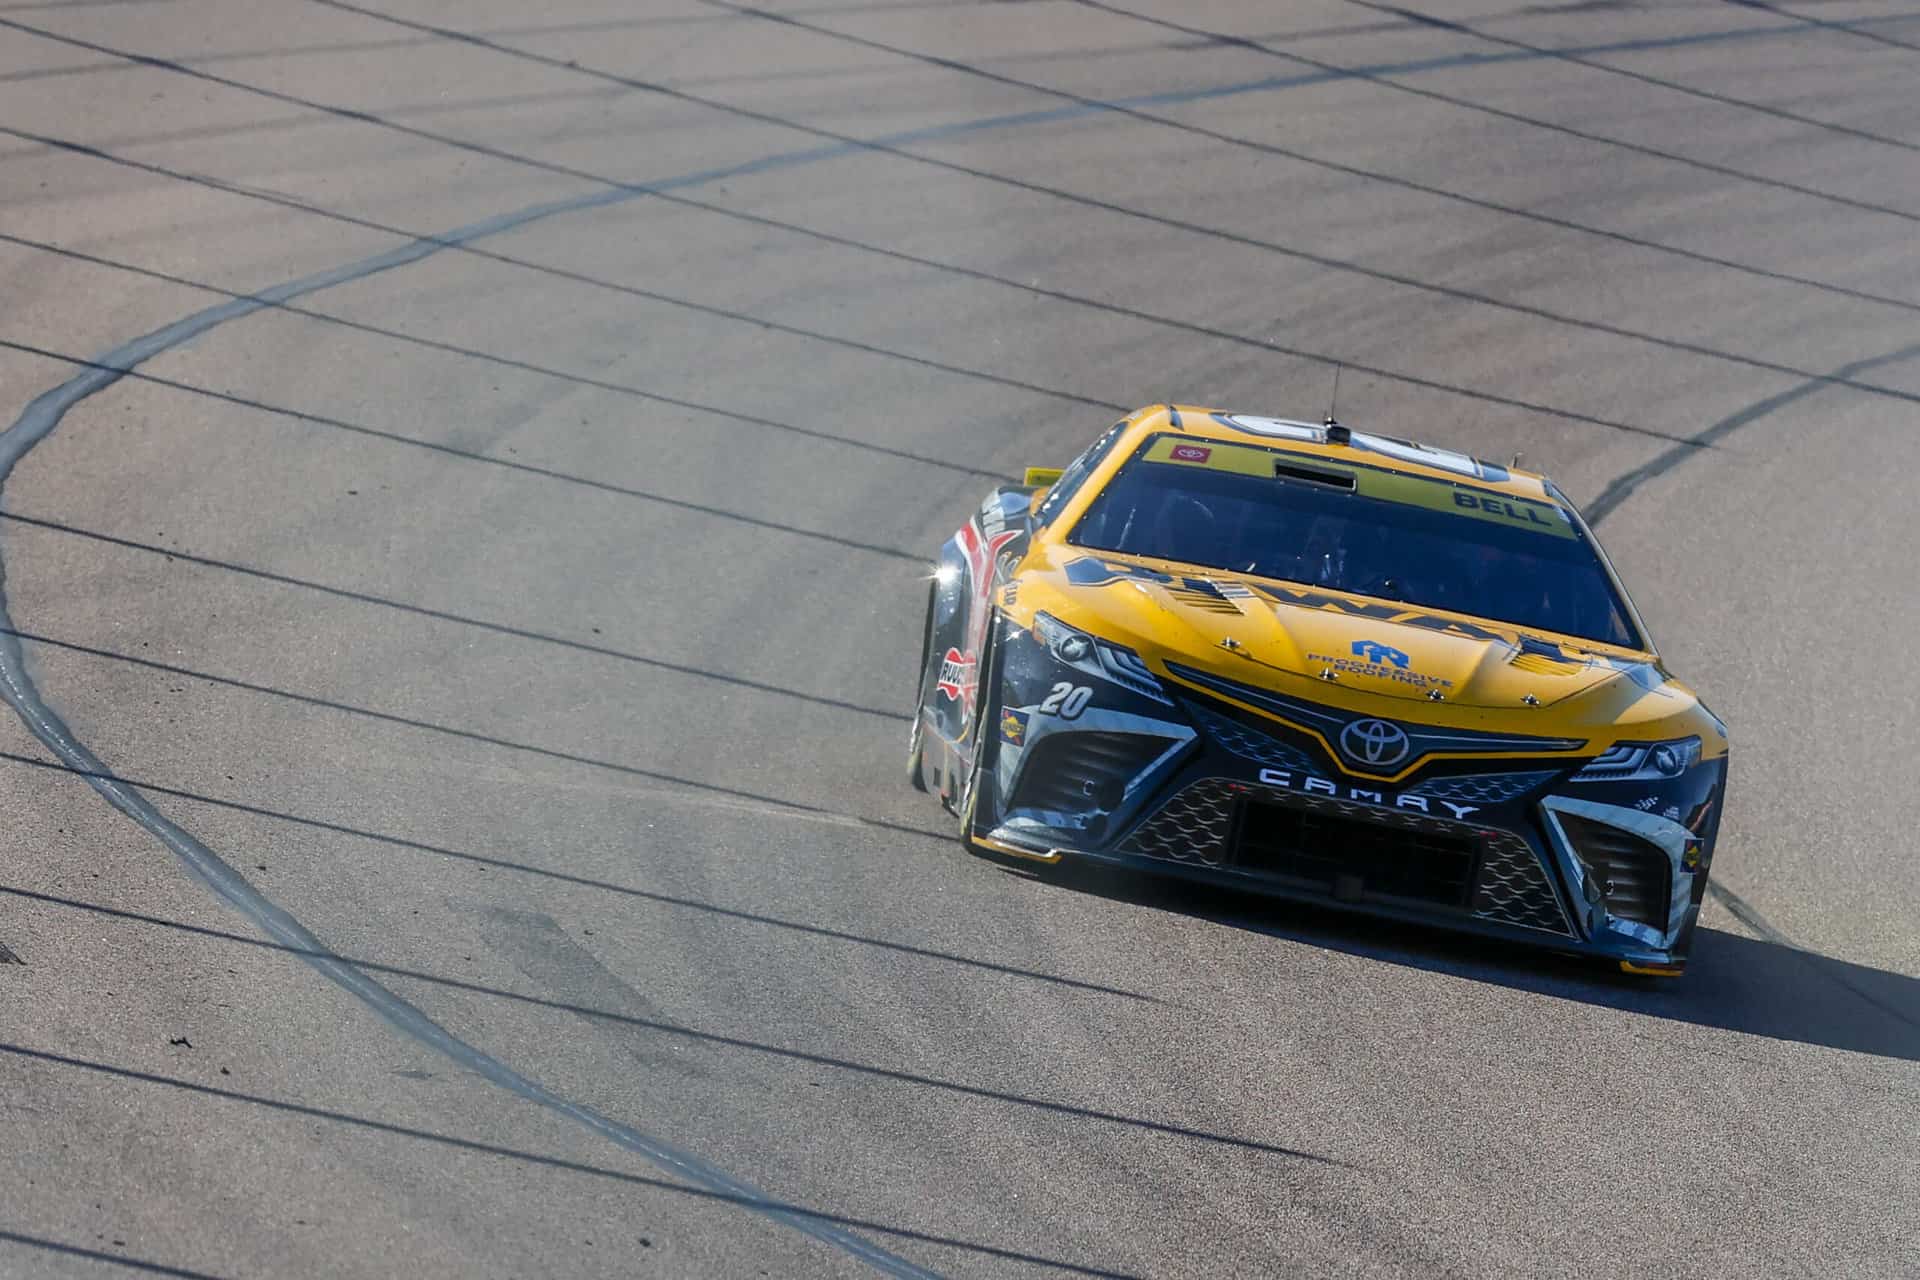 Christopher Bell crashed early in Sunday's NASCAR Championship Race at Phoenix Raceway after a brake failure relegated him to a last place finish.